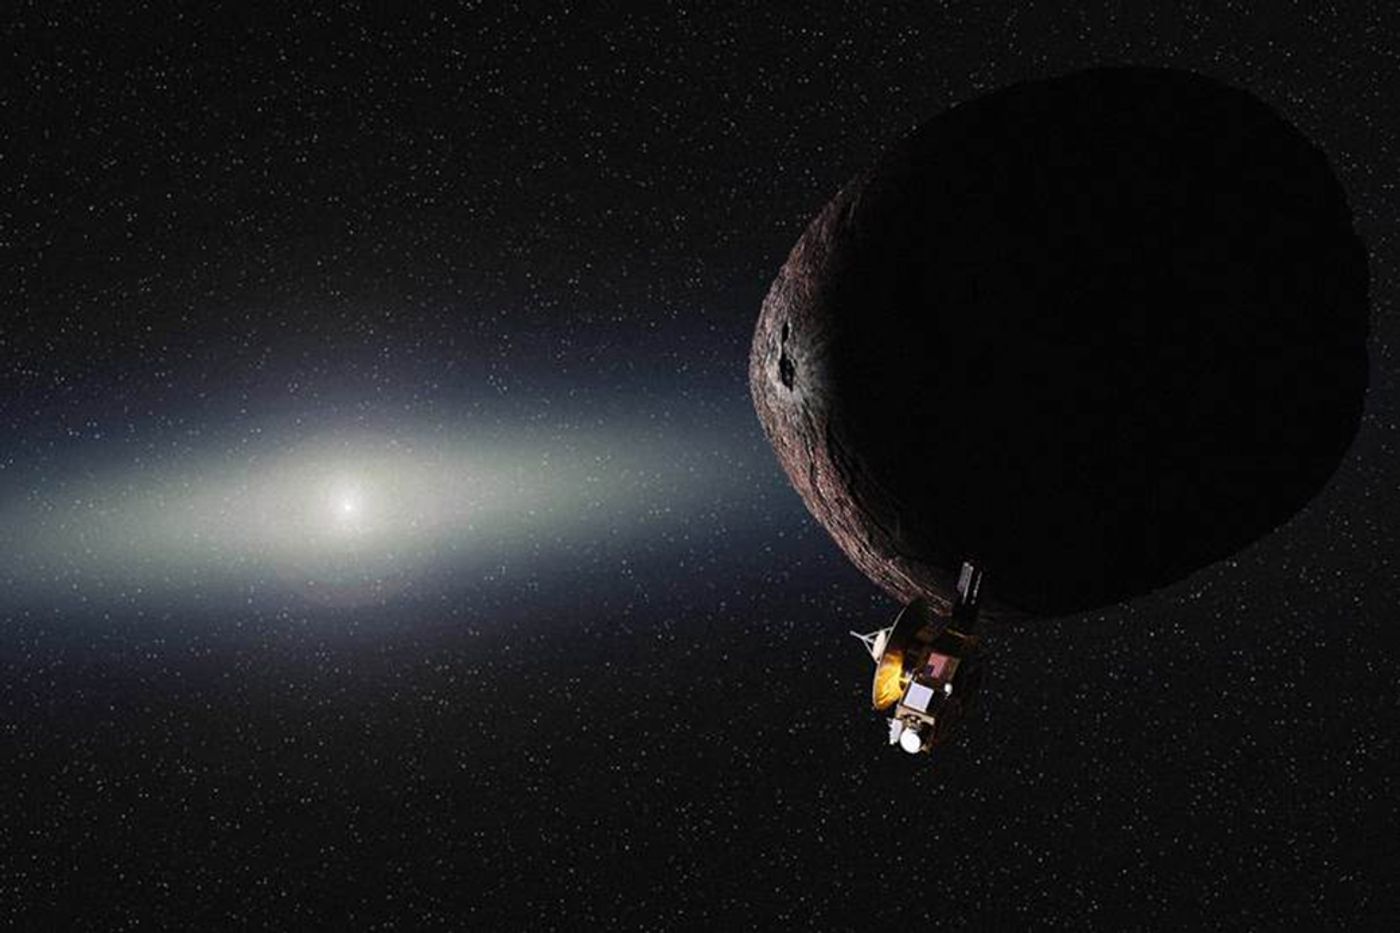 New Horizons' next target in our Solar System is a Kuiper Belt Object (KBO) known as 2014 MU69.